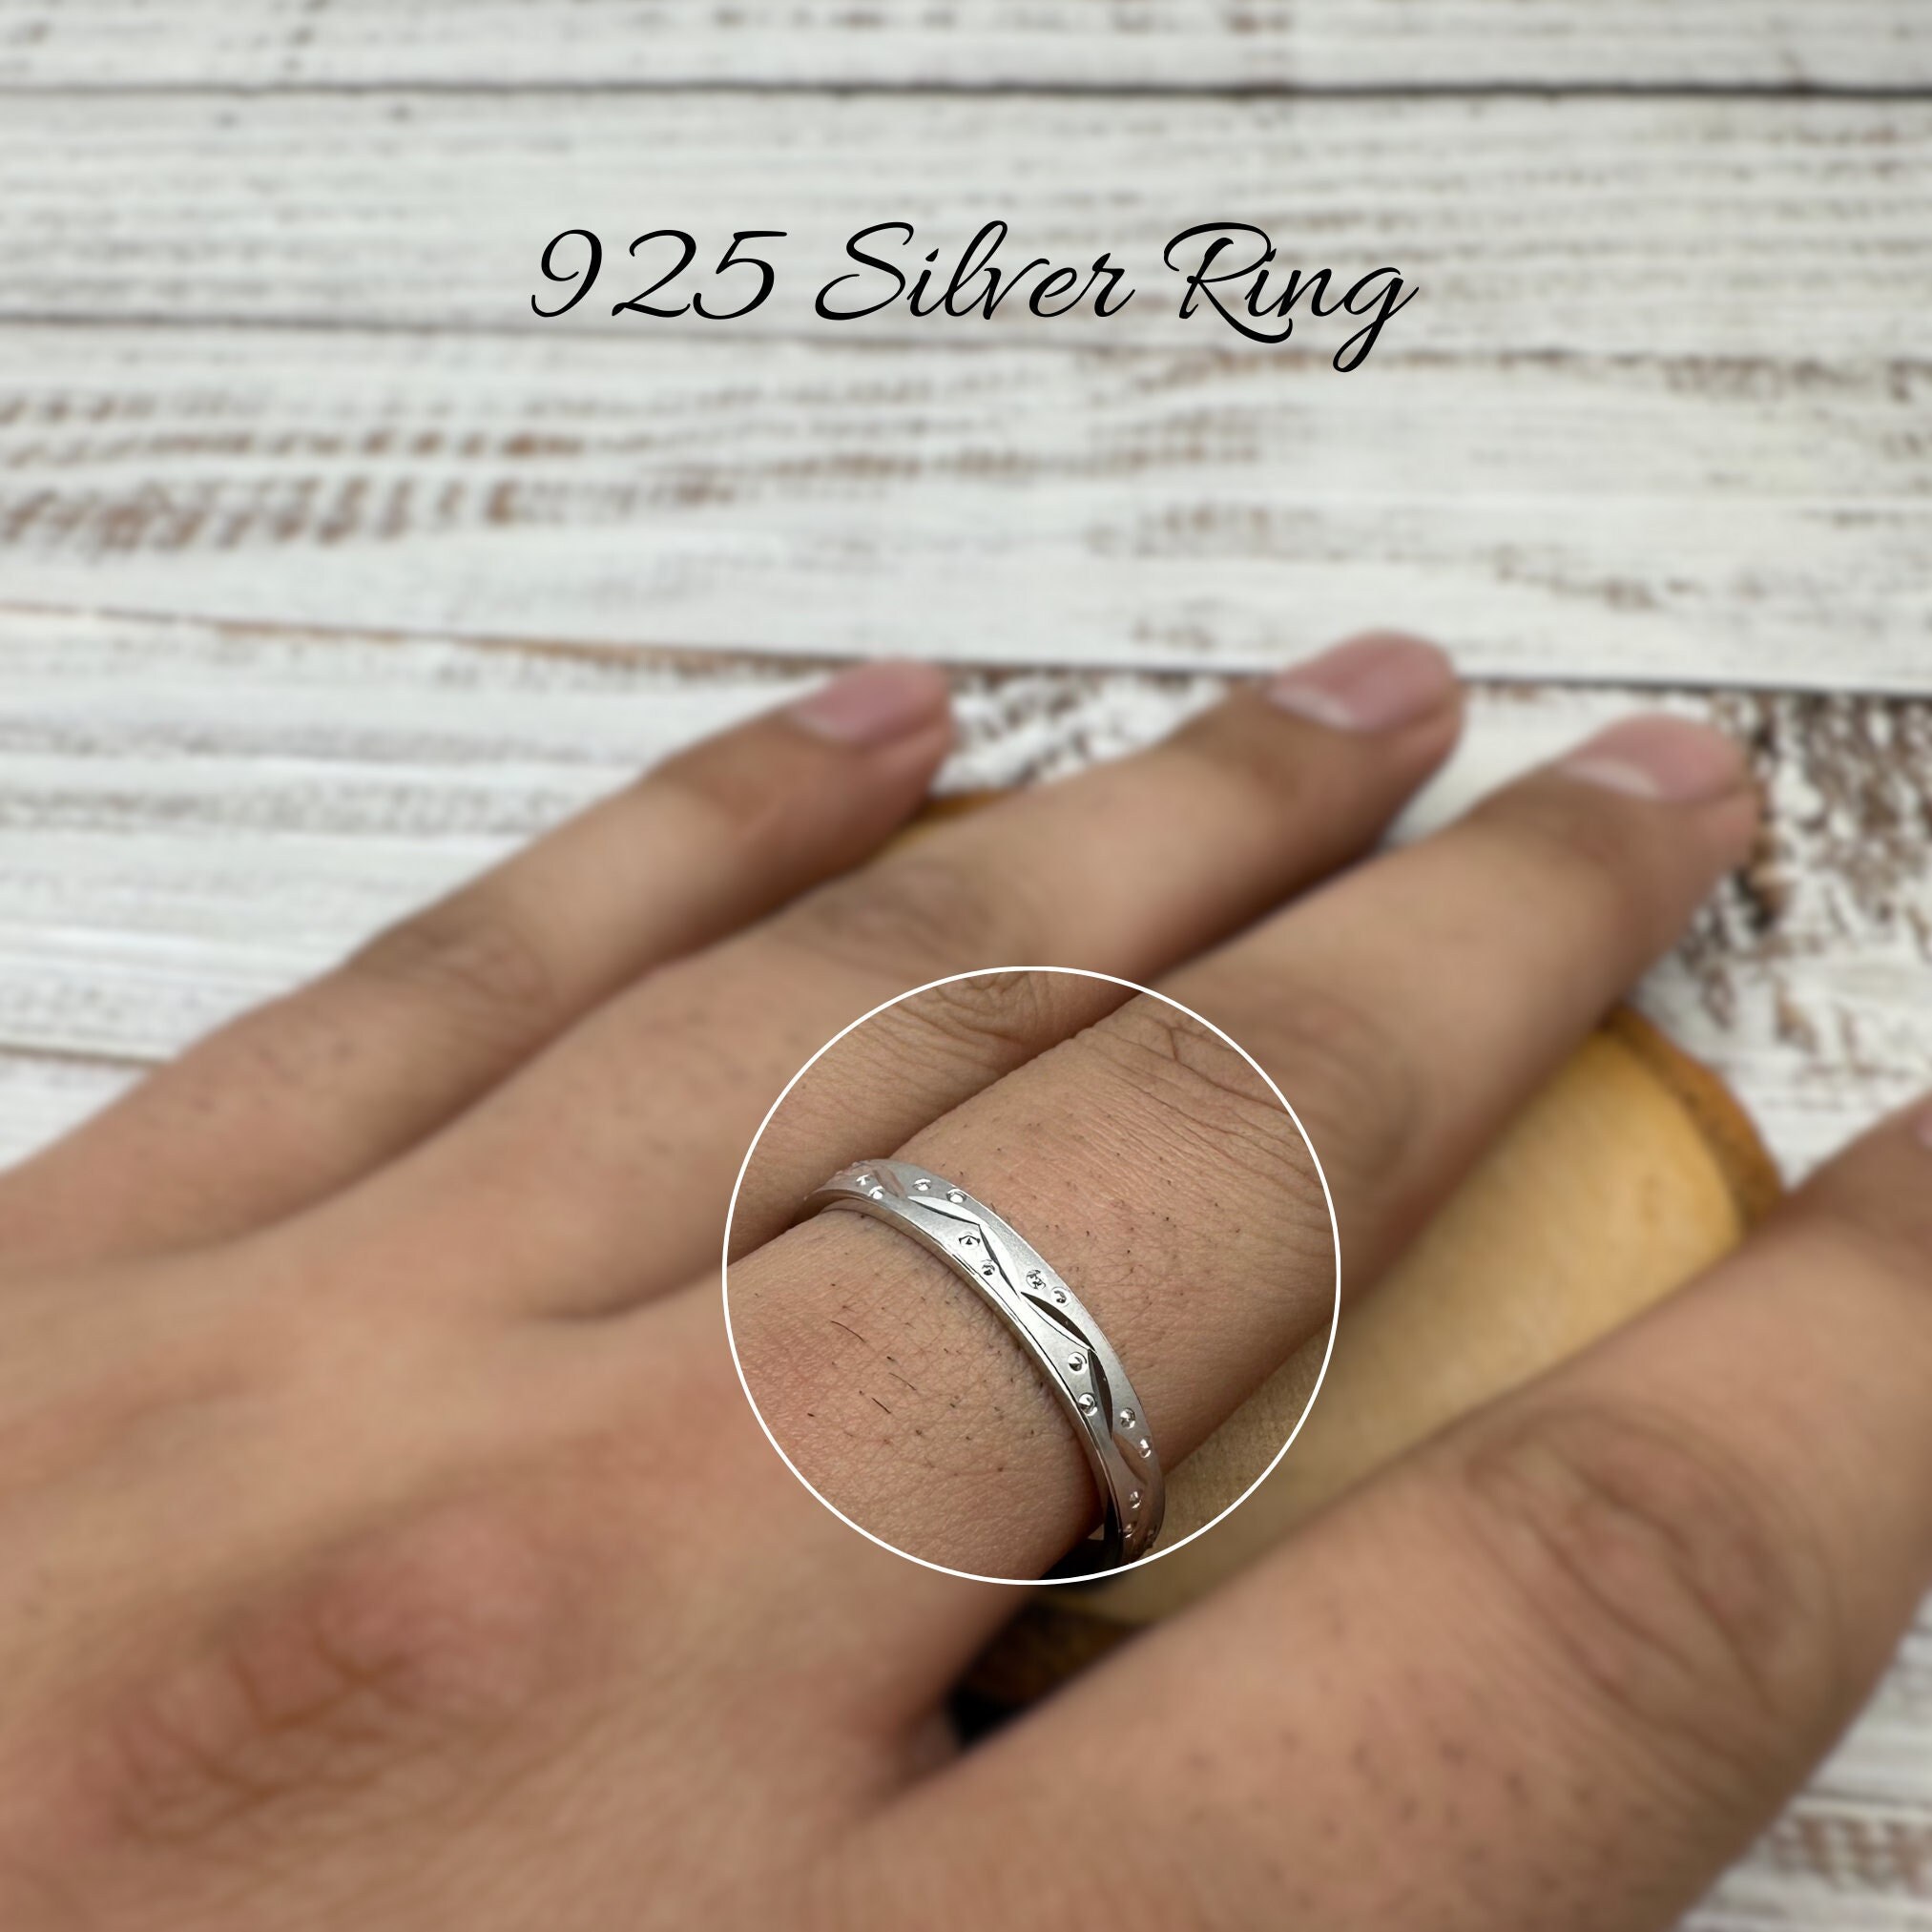 Siempre Vegvisir Band - Simple and classic silver-toned ring